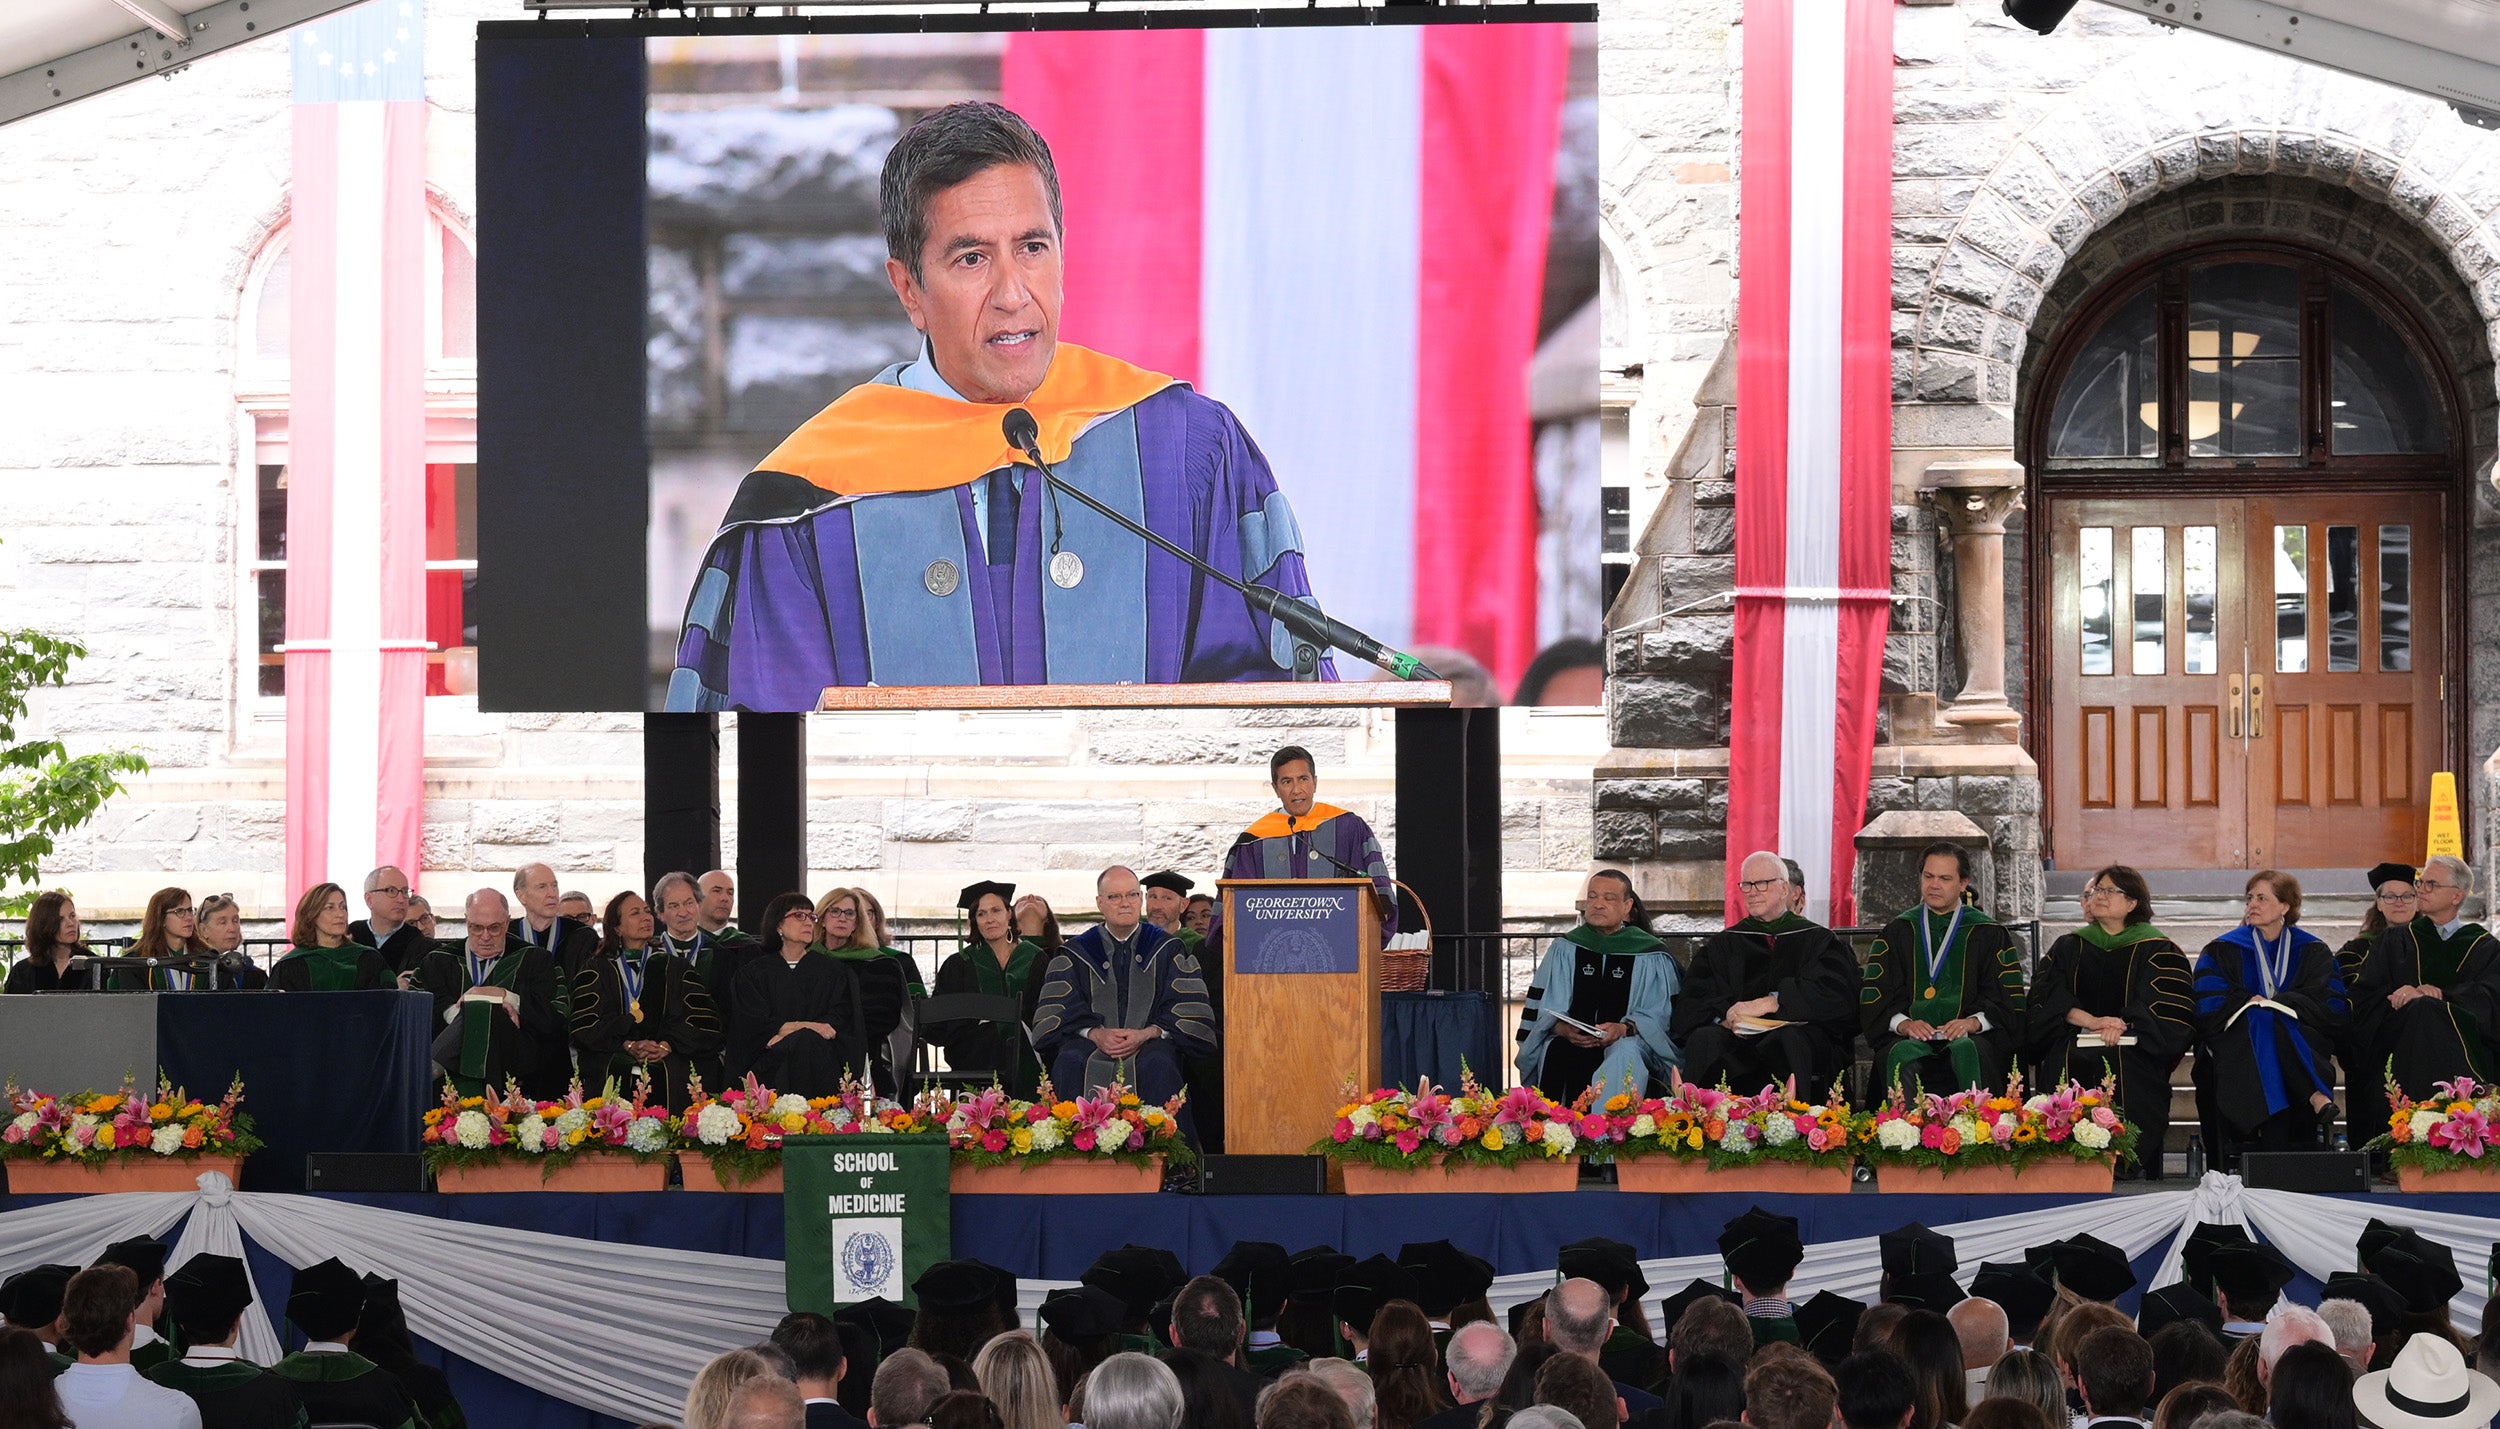 Sanjay Gupta speaks from a podium onstage at the School of Medicine commencement ceremony